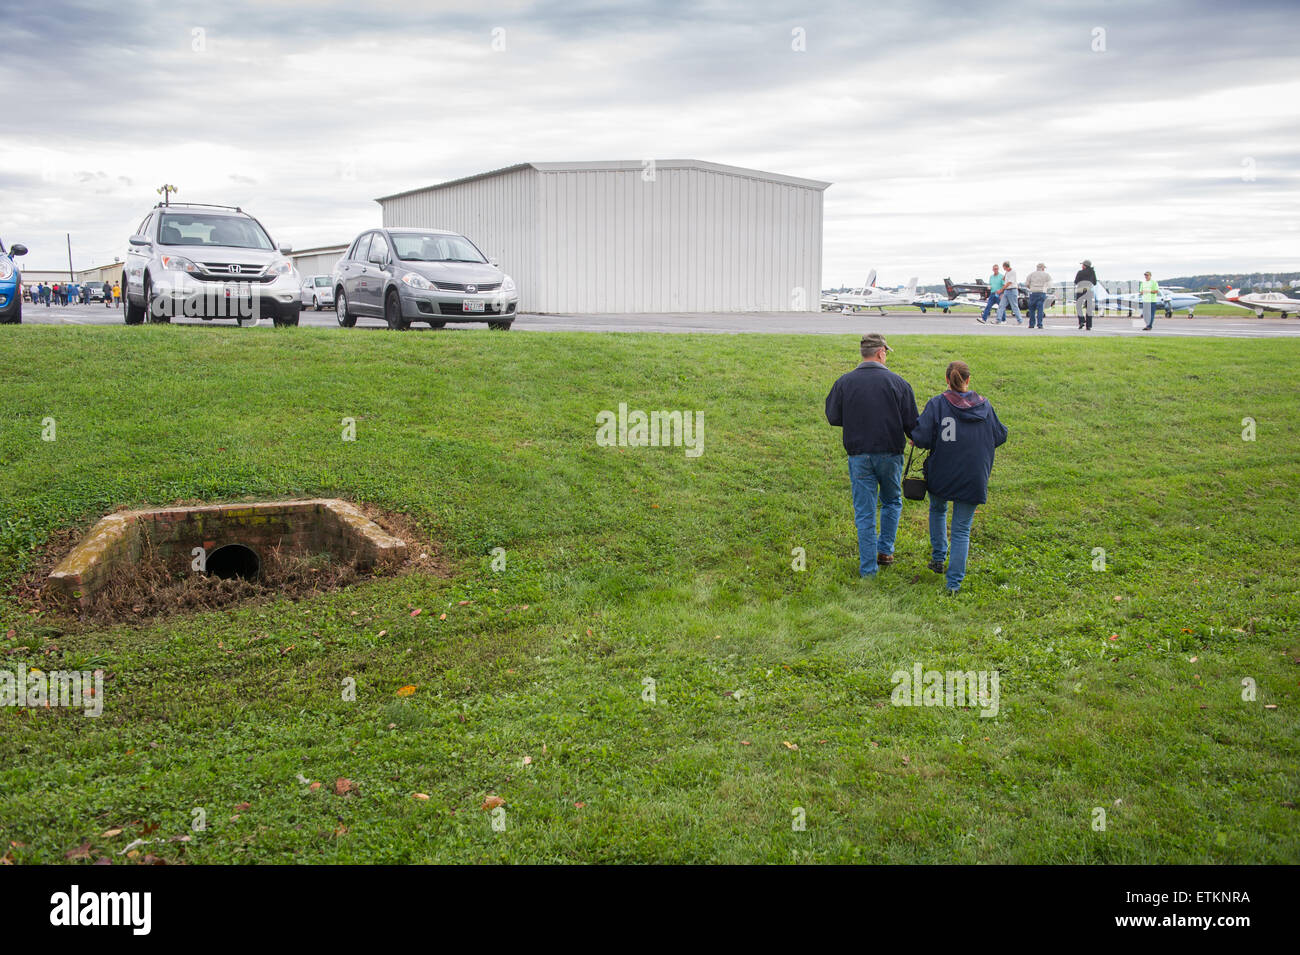 Couple walking up grassy hill towards small airplane hanger in Creswell, Maryland, USA Stock Photo